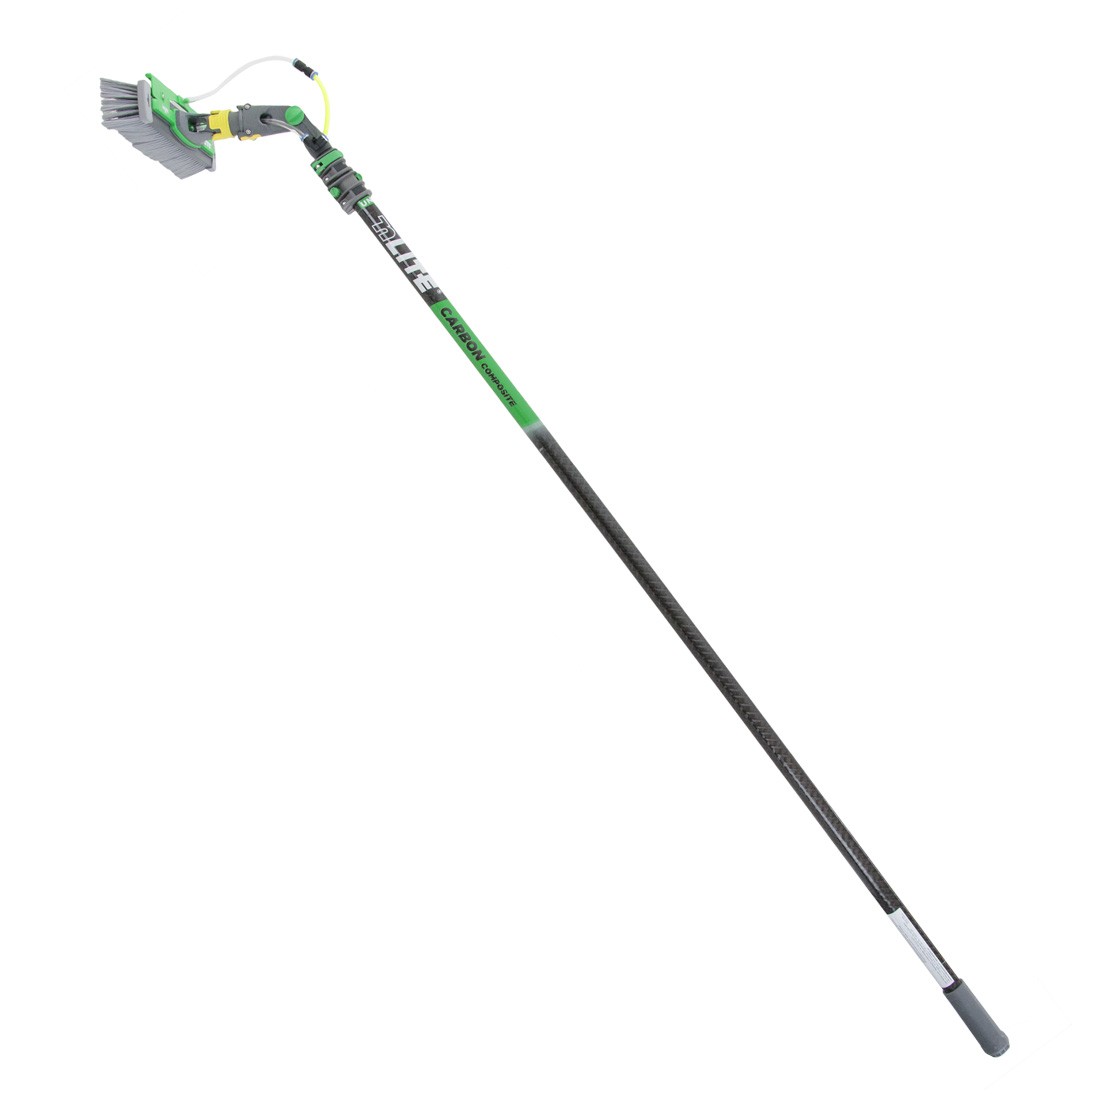 Unger nLITE Carbon Composite Water Fed Pole Kit 10.5 Foot - 11" Powerbrush Full View